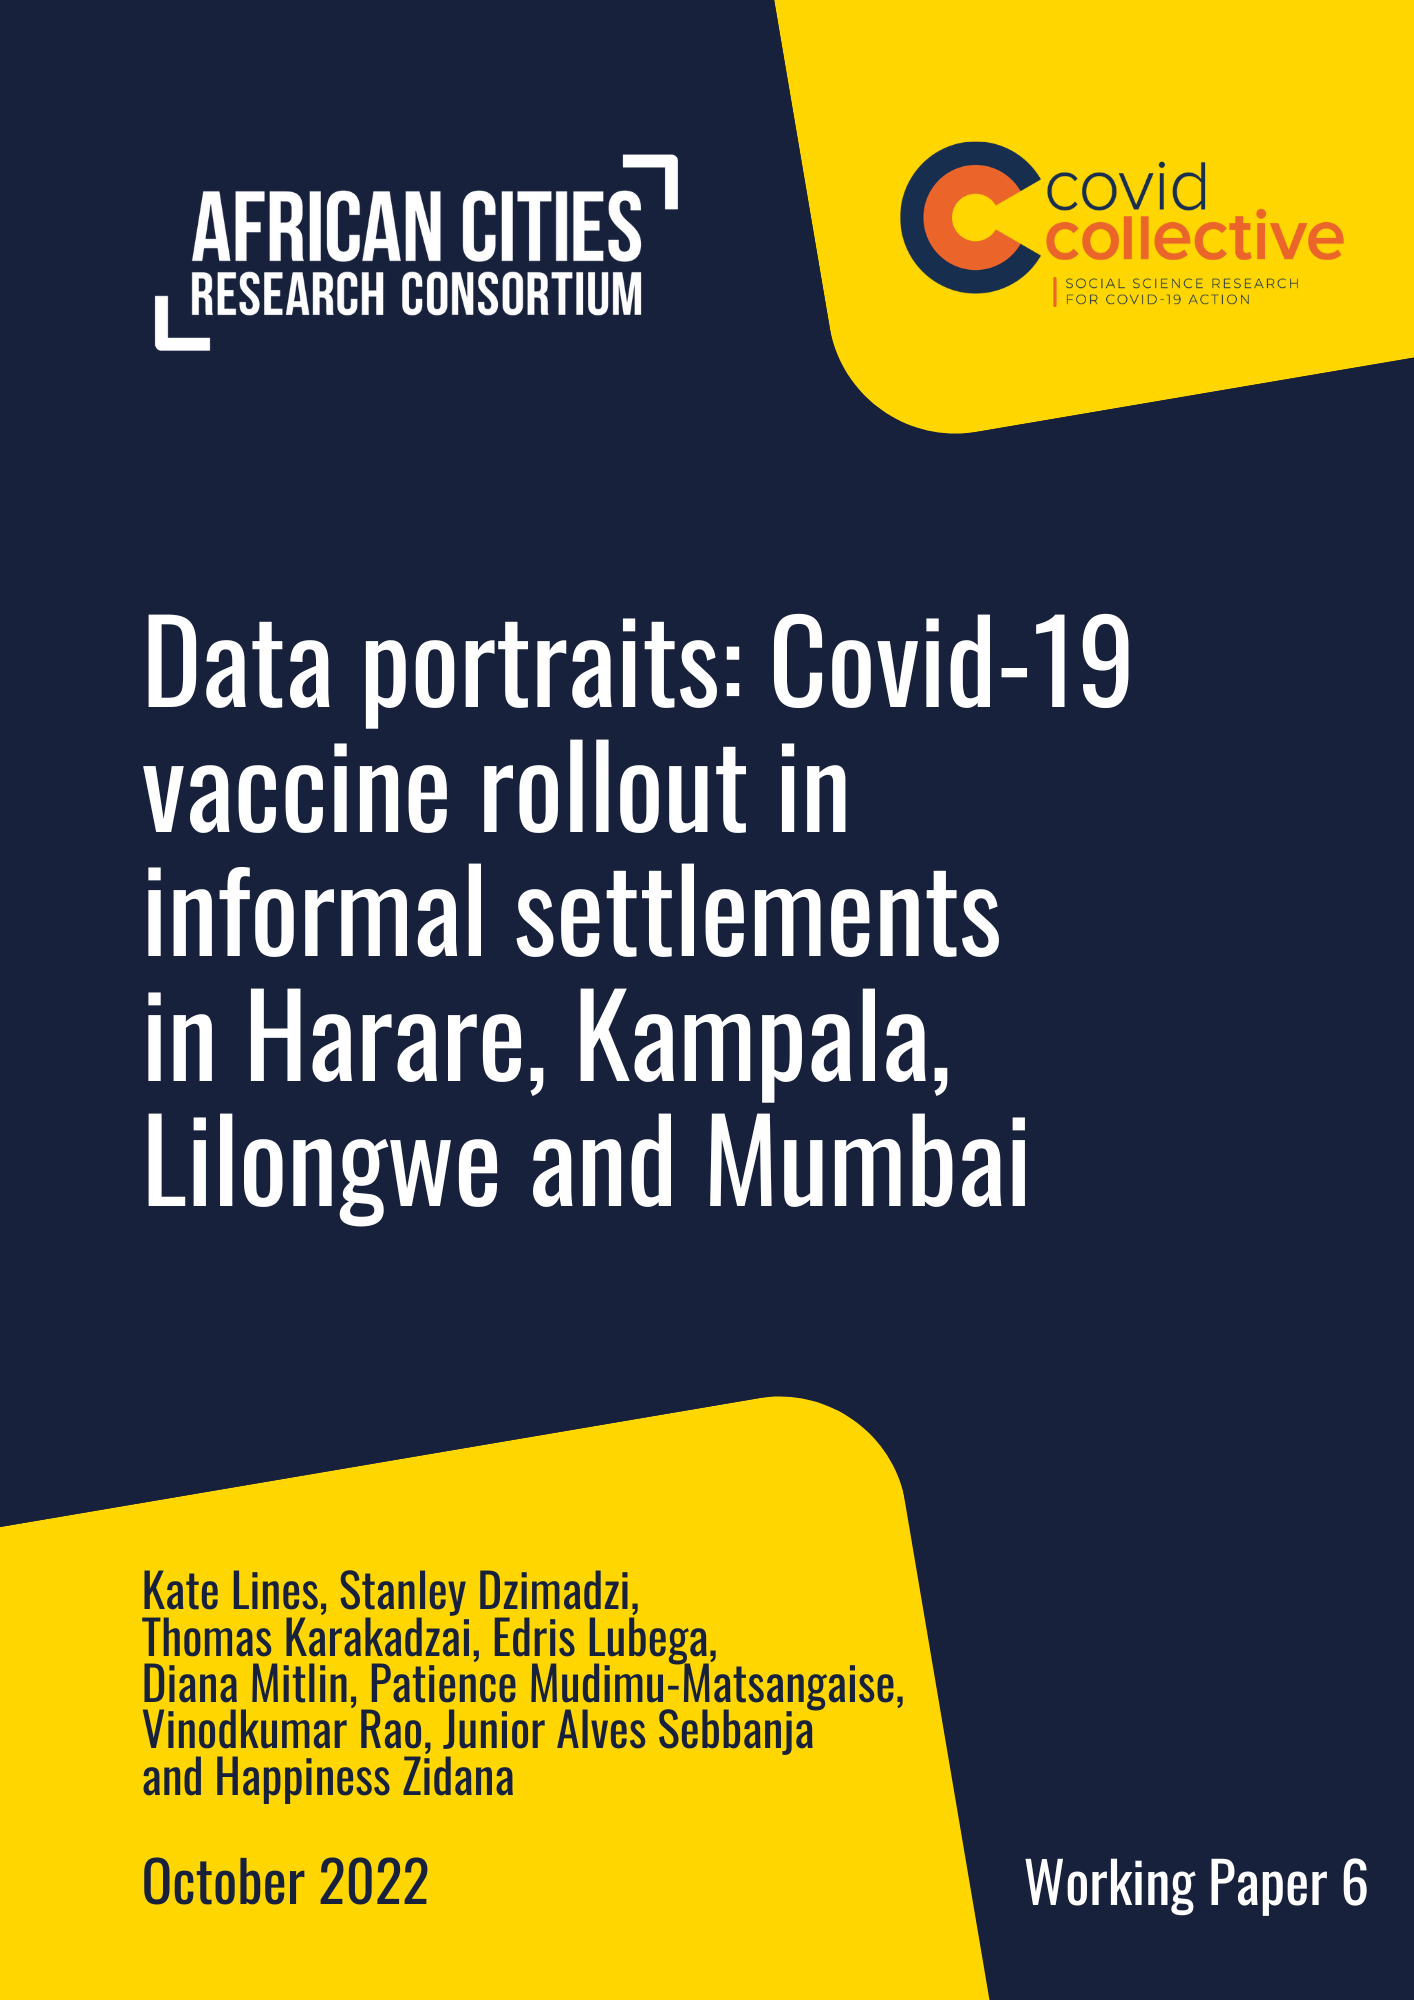 Working Paper 6 | Data portraits: Covid-19 vaccine rollout in informal settlements in Harare, Kampala, Lilongwe and Mumbai